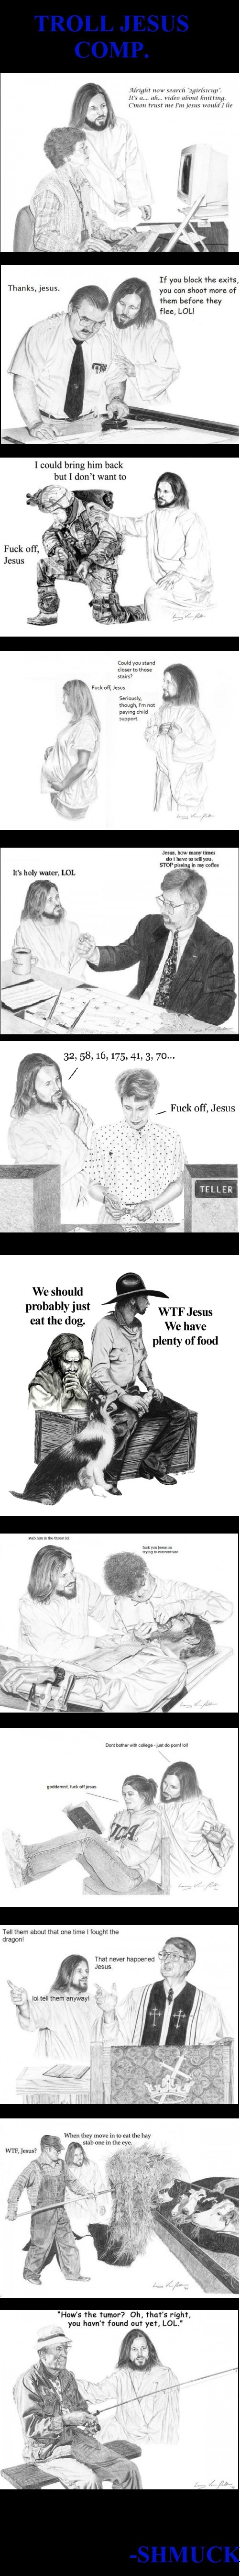 Troll Jesus. He knows..... H yen block the ems, you can mm more of them before they flee, LOL! Thanks, Jesus. I could bring him back but I don' t want to Fuck o